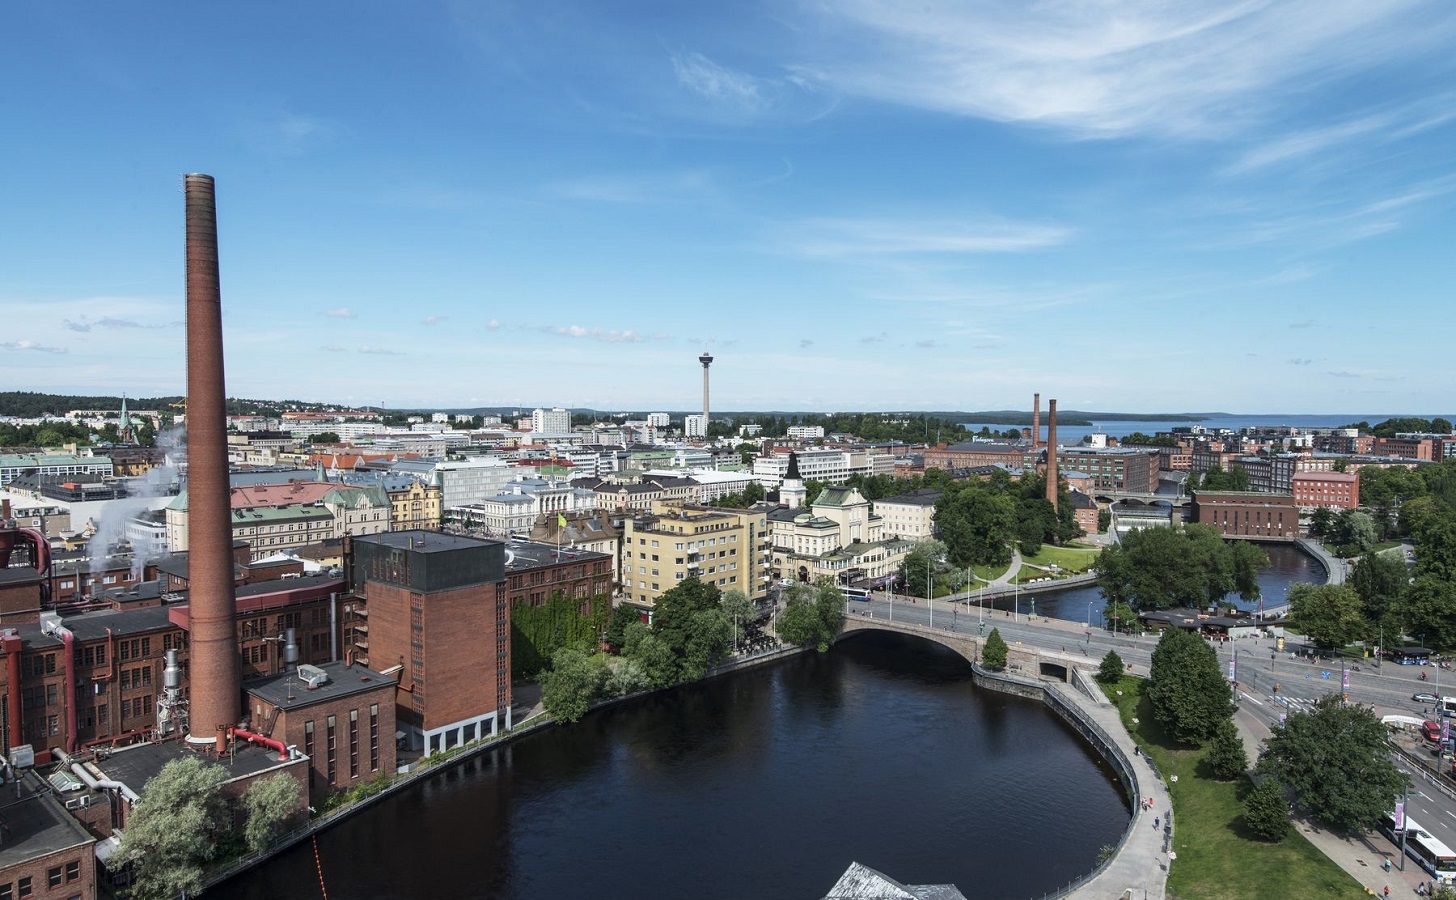 Tampere Finland City 1456x900